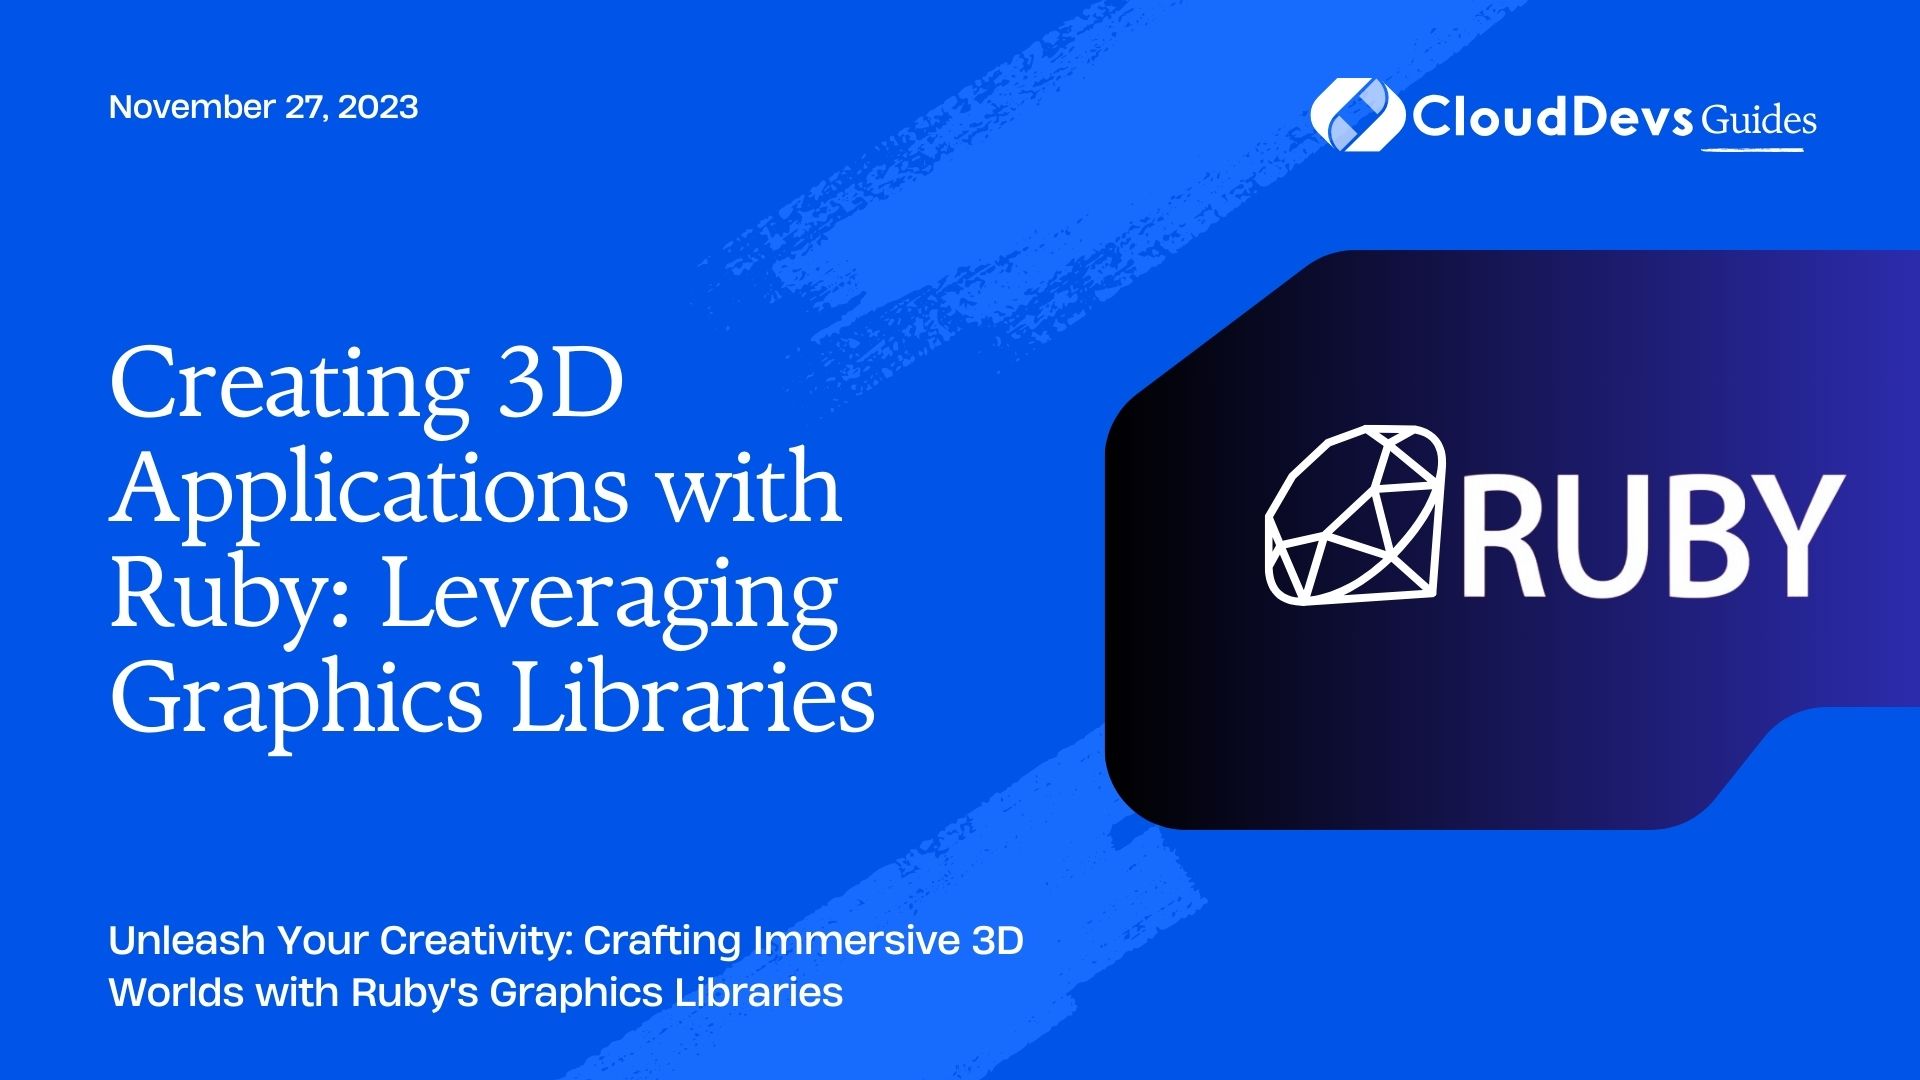 Creating 3D Applications with Ruby: Leveraging Graphics Libraries